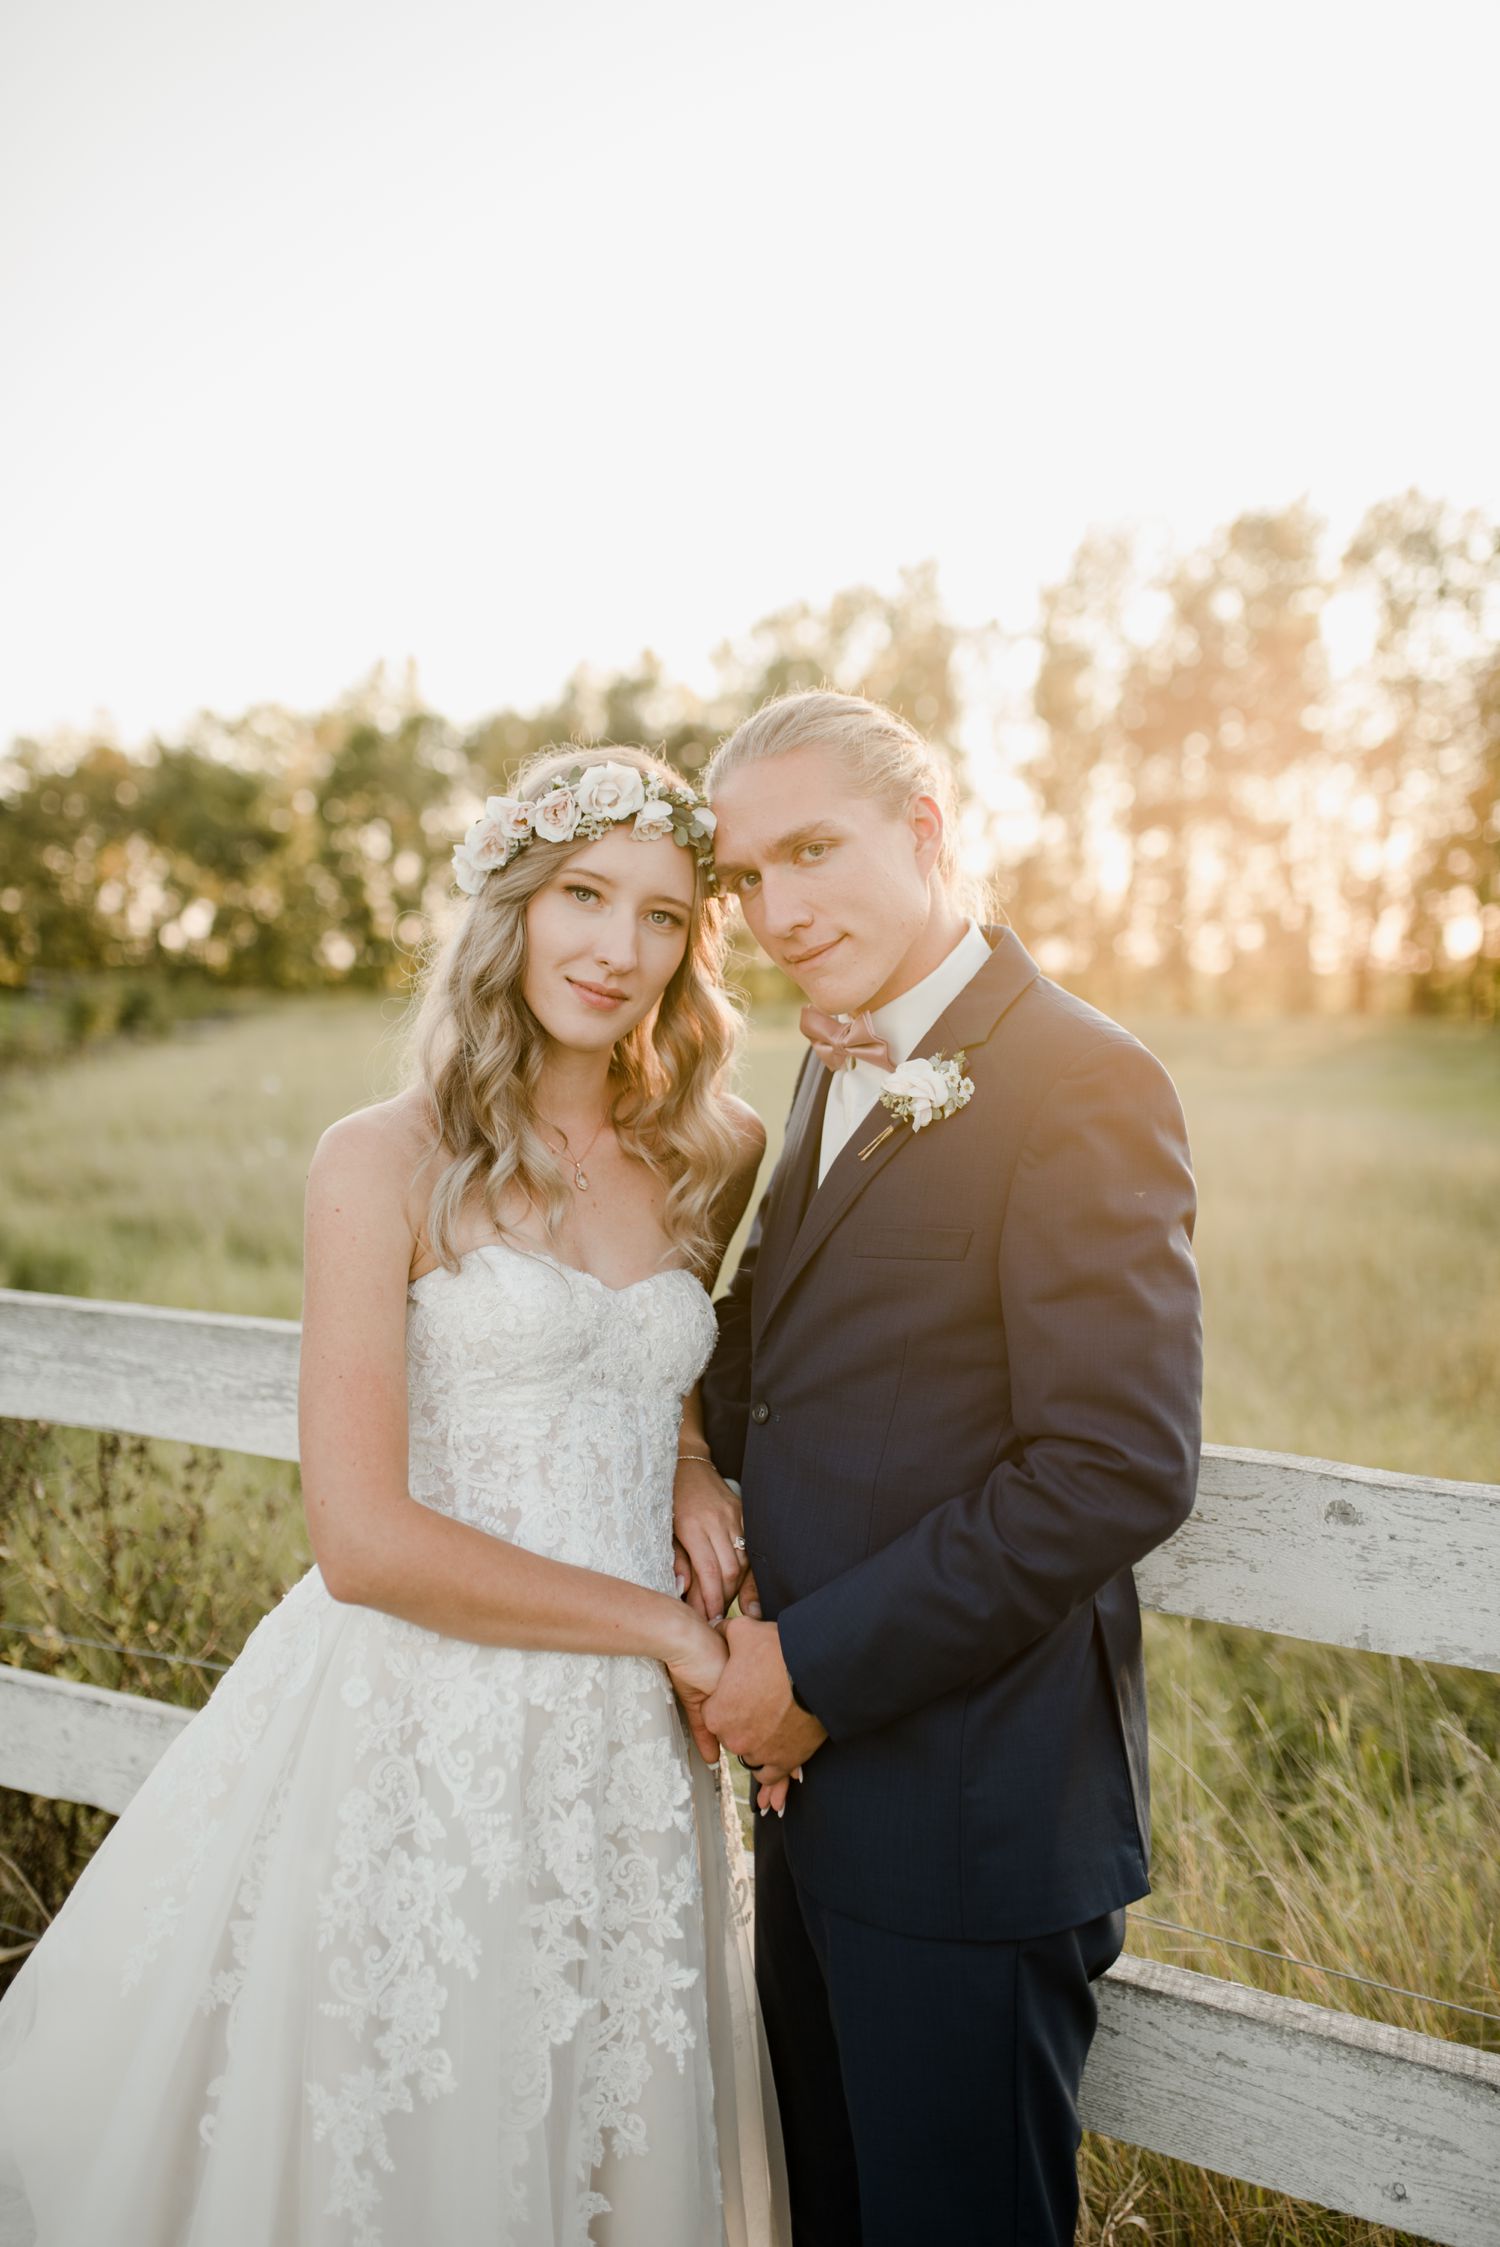 Brooke and Kevin together at their autumn Ashgrove Acres Wedding in Winnipeg Manitoba, photographed by Vanessa Renae Photography, a Winnipeg and Kenora Wedding photographer.